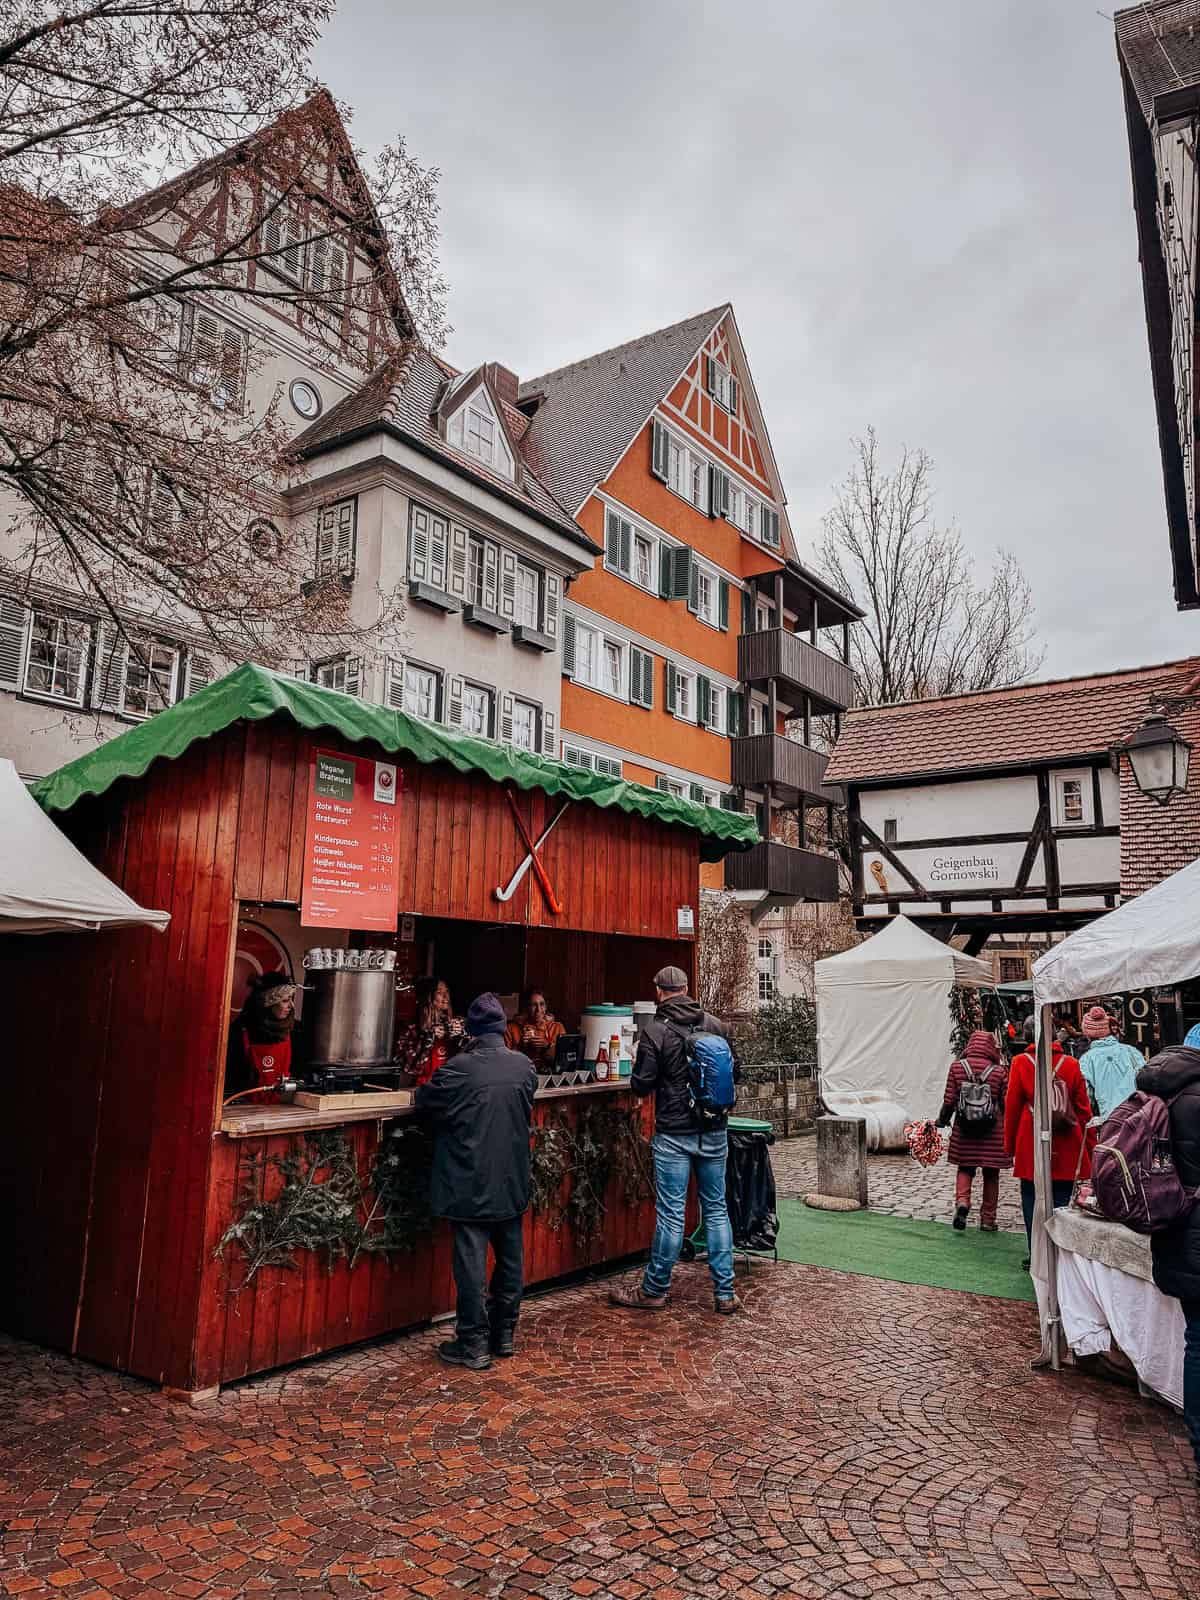 Outdoor winter market scene in Tübingen, showing a red wooden hut serving drinks and food, surrounded by people in winter attire